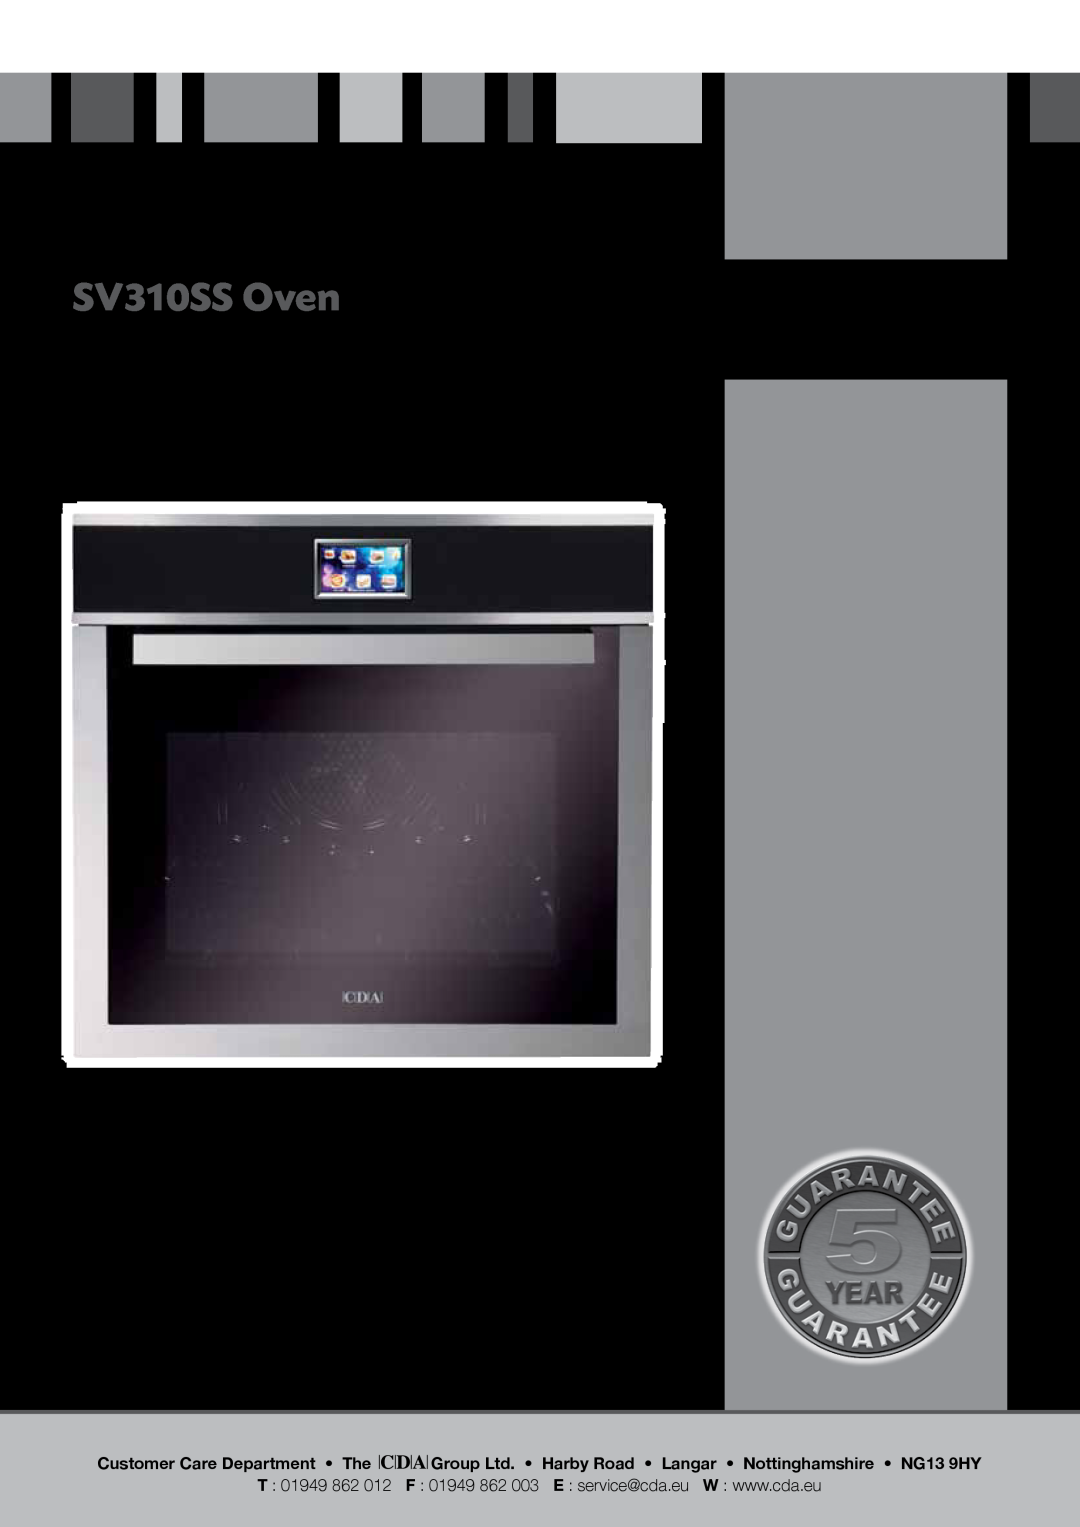 CDA manual SV310SS Oven, Manual for Installation, Use and Maintenance, Customer Care Department The, T 01949 